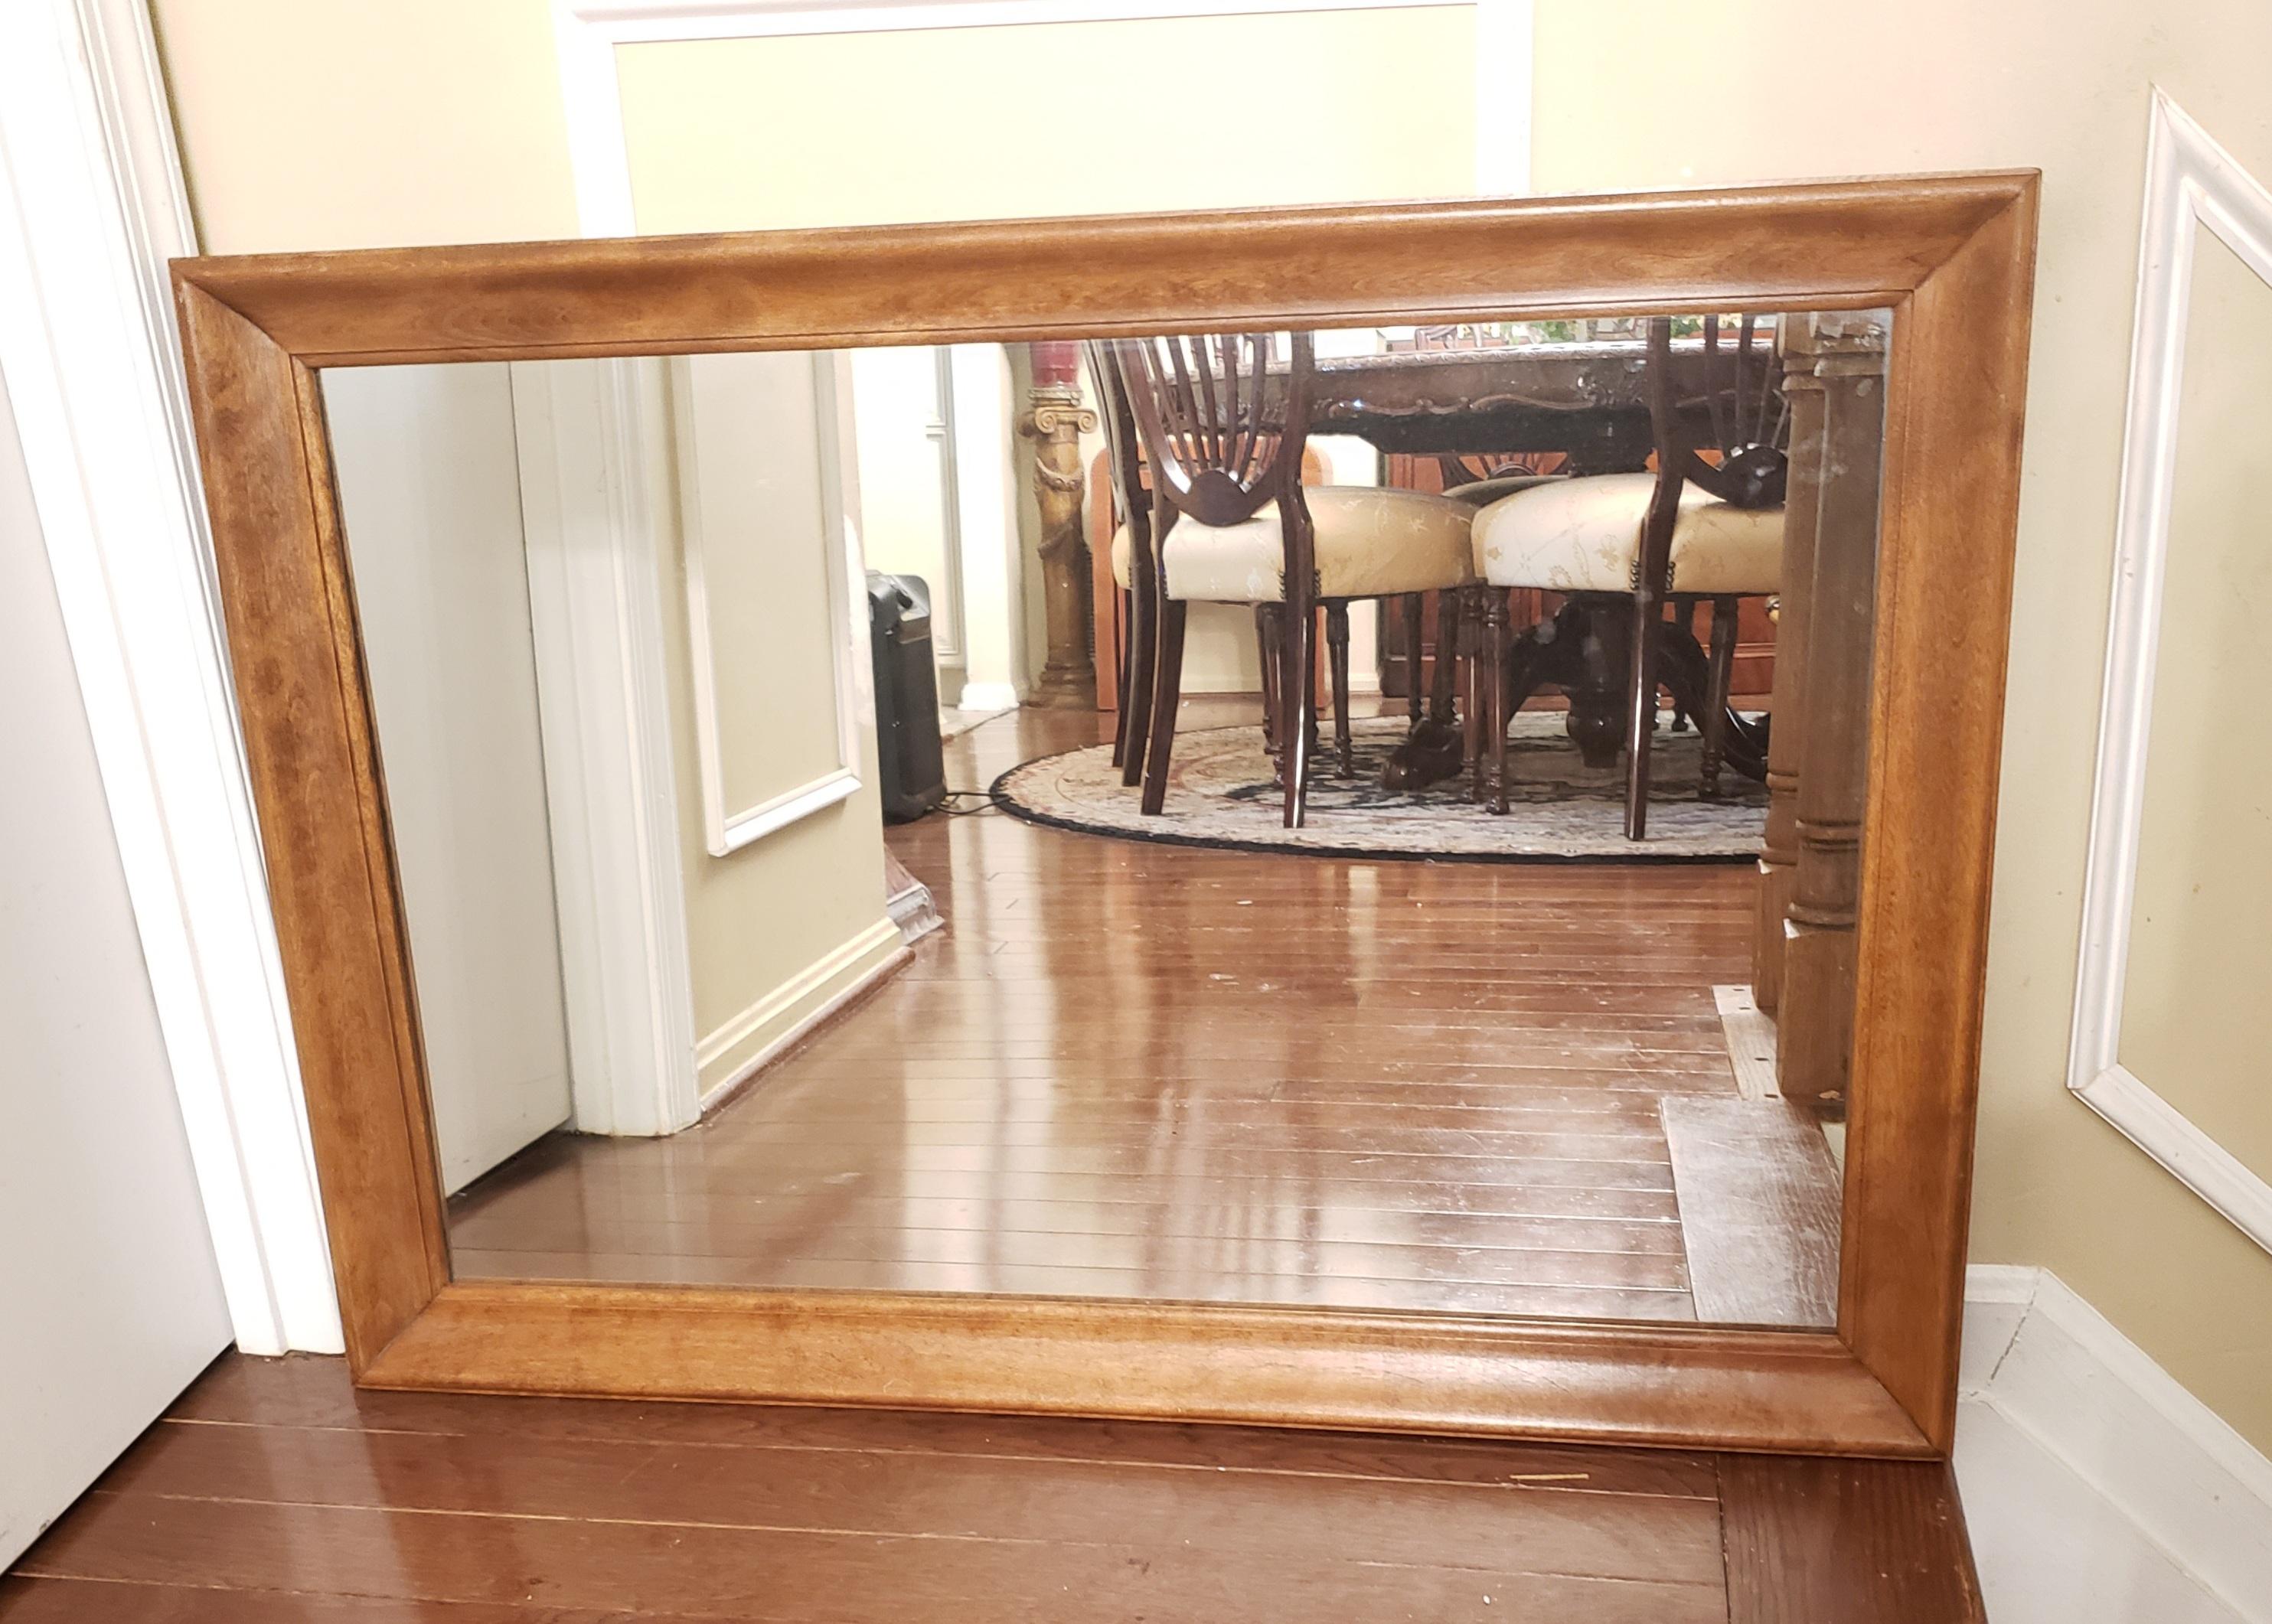 Vintage Ethan Allen Heirloom nutmeg maple colonial style wall mirror. Very good vintage condition. Measure 40.5